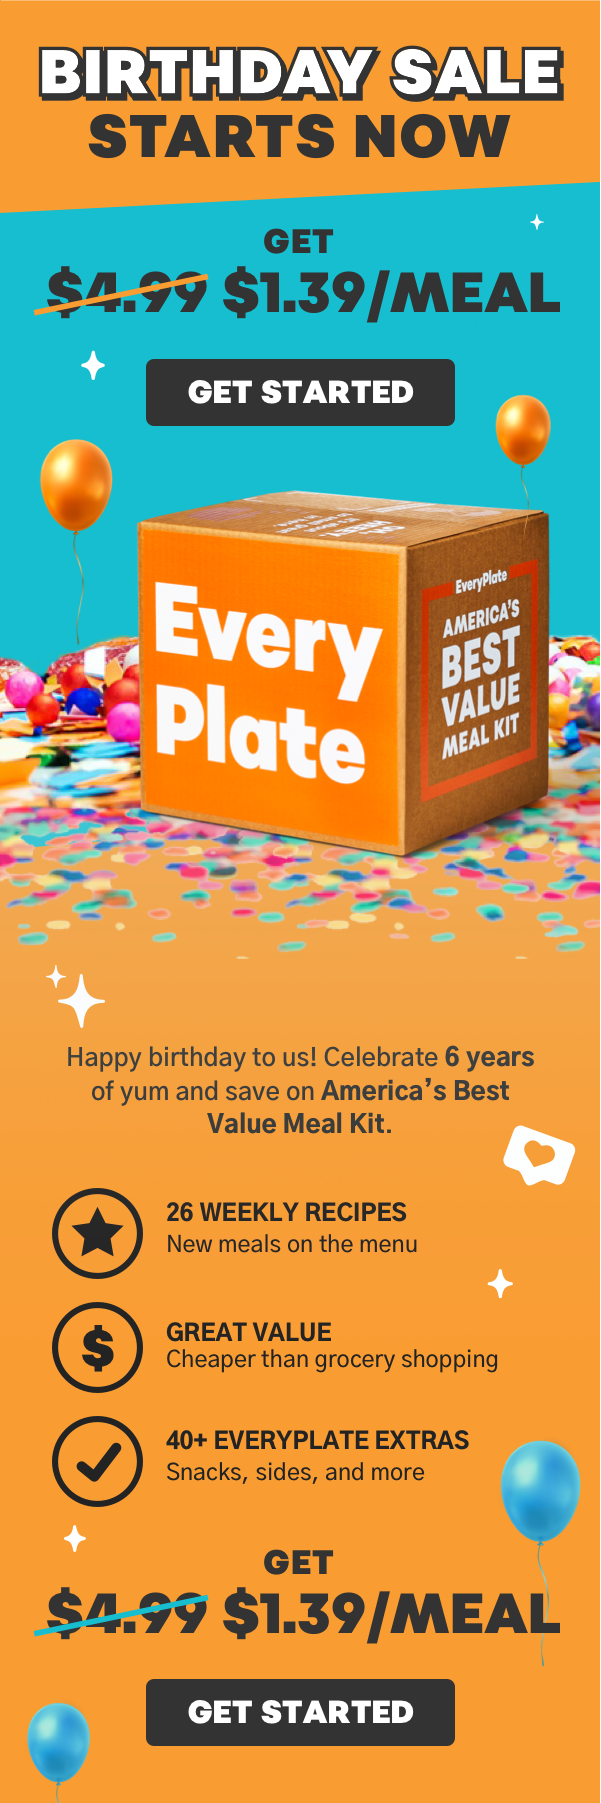 EveryPlate's birthday sale starts now. Snag $1.39/meal and get started now.